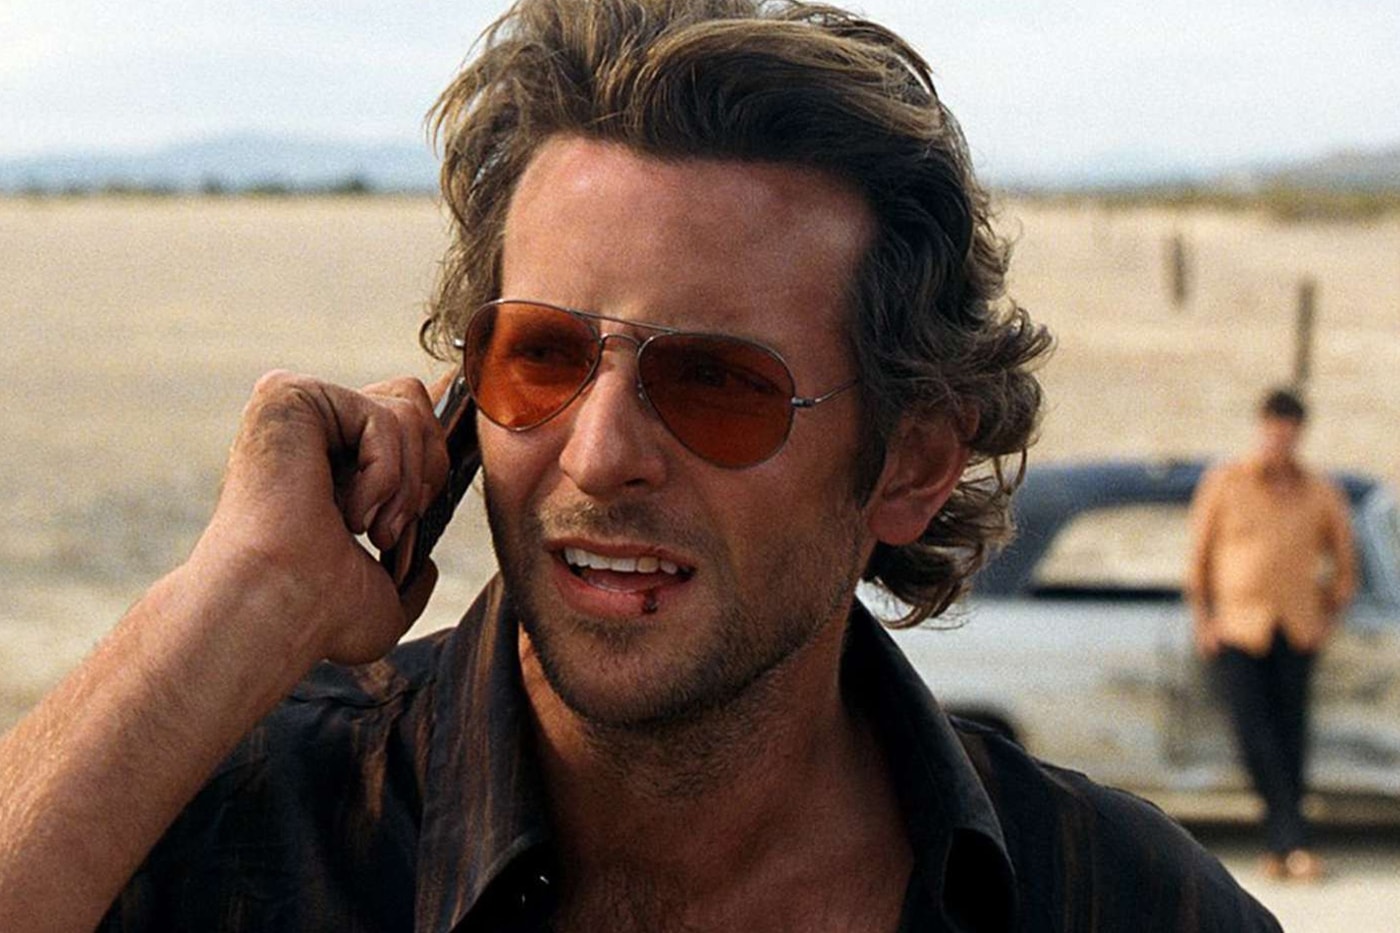 Bradley Cooper Reveals He Would Do 'The Hangover 4' in an "Instant" reprise role phil las vegas maestro a star is born the new yorker radio hour david remnick